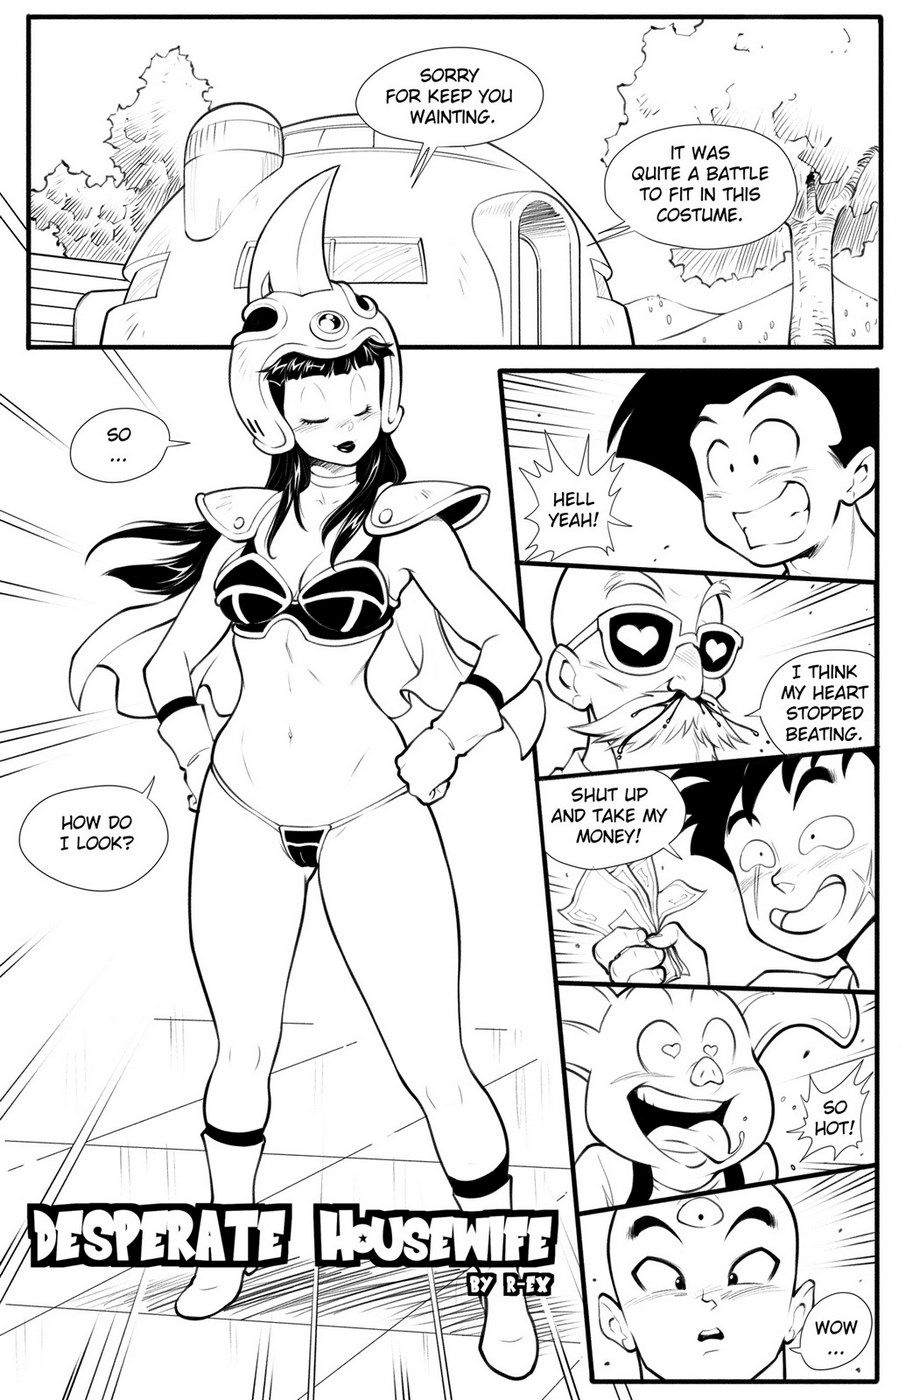 Desperate Housewife - R_EX [Dragon Ball Z] page 3